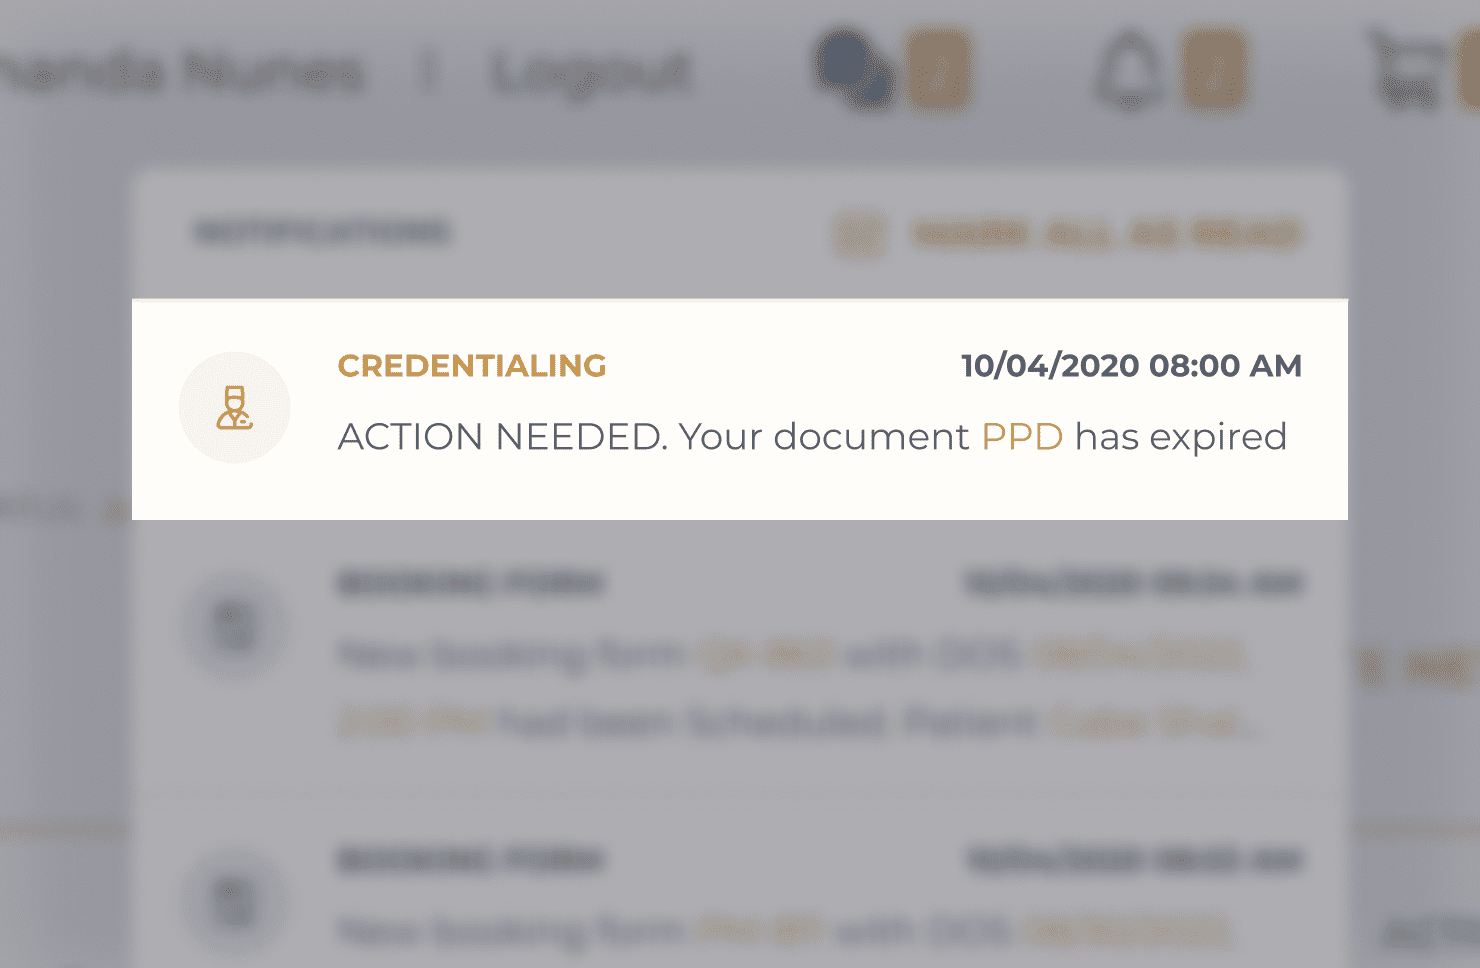 Get notified automatically when your credentials expire and when it’s re-credentialing time.